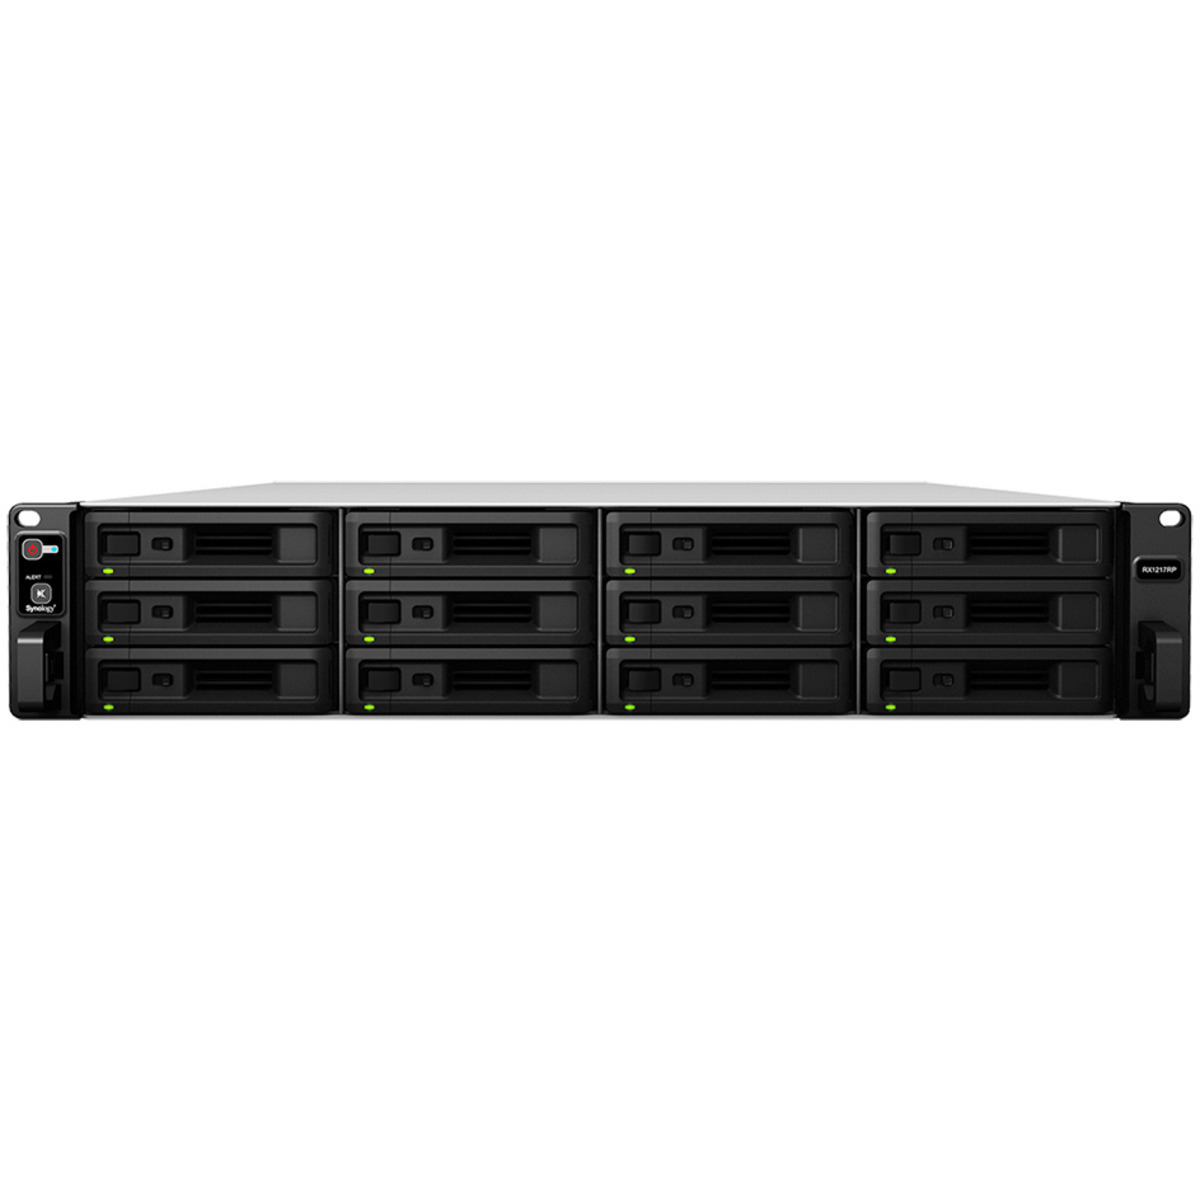 buy $5268 Synology RX1217RP 96tb RackMount Expansion Enclosure 12x8000gb Toshiba Enterprise Capacity MG08ADA800E 3.5 7200rpm SATA 6Gb/s HDD ENTERPRISE Class Drives Installed - Burn-In Tested - ON SALE - nas headquarters buy network attached storage server device das new raid-5 free shipping usa christmas new year holiday sale RX1217RP